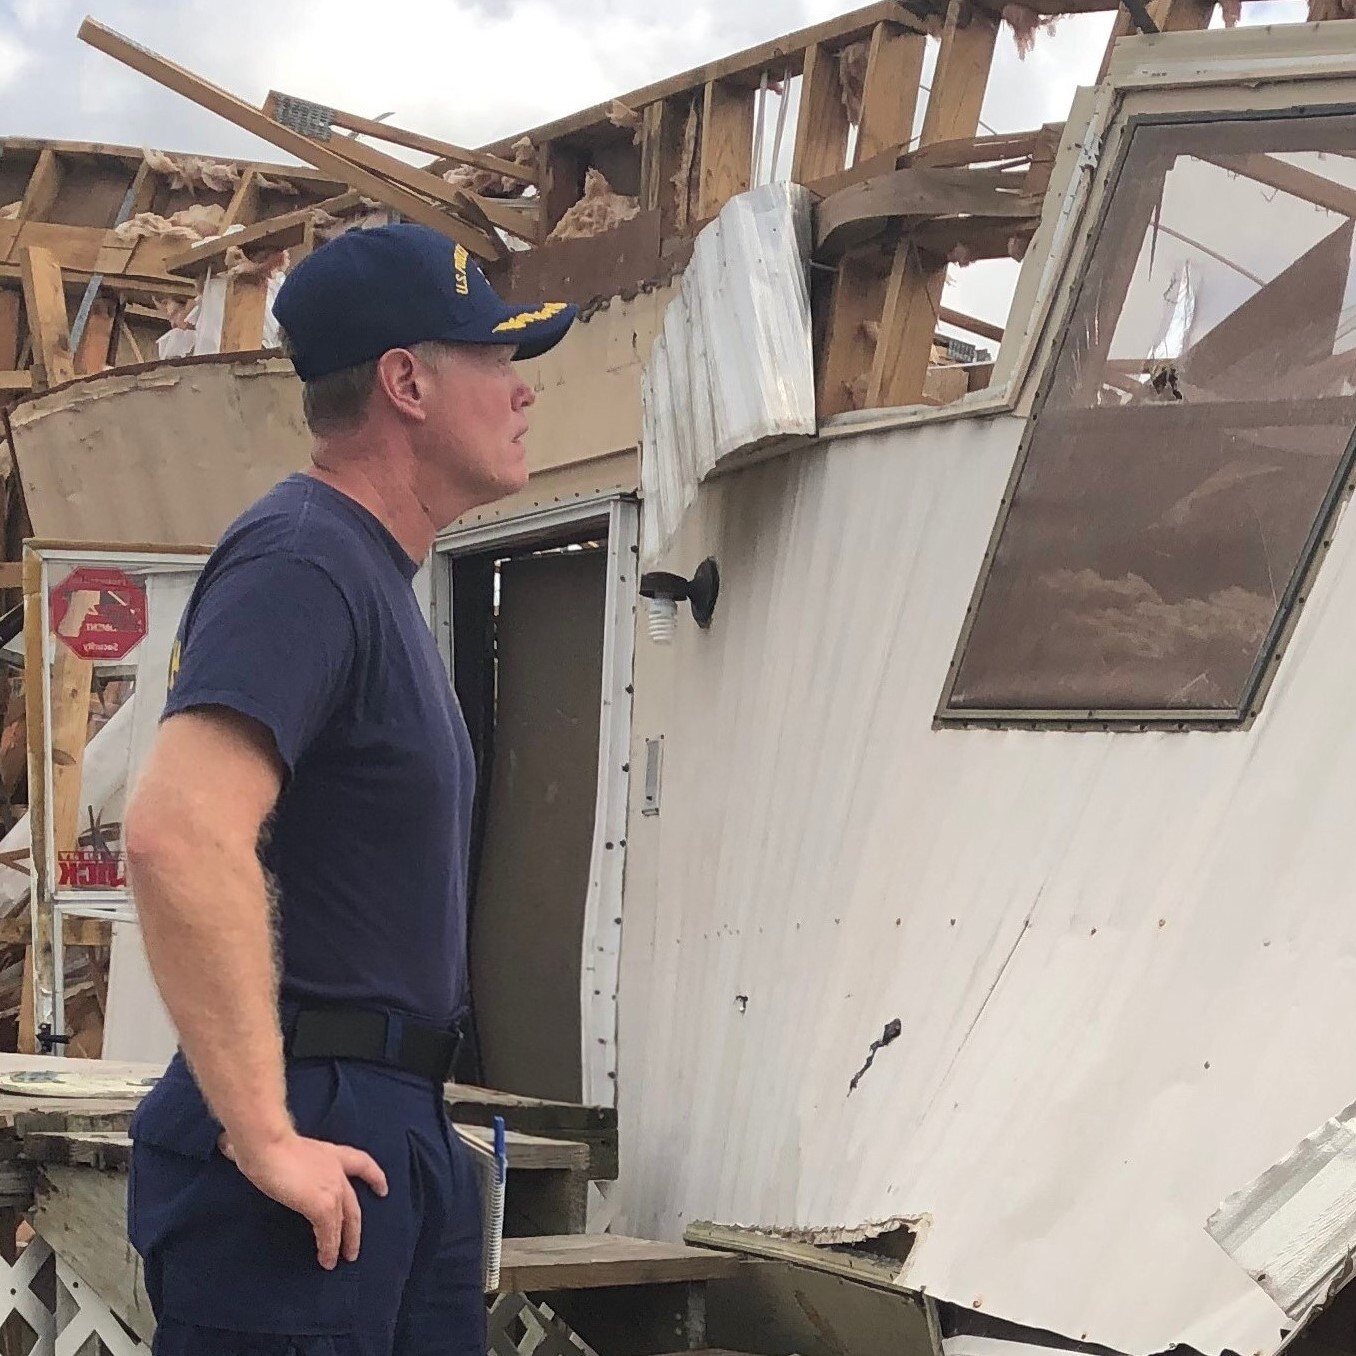 U.S. Public Health Service Capt. Troy Ritter examines a damaged mobile home outside Lake Charles, Louisiana